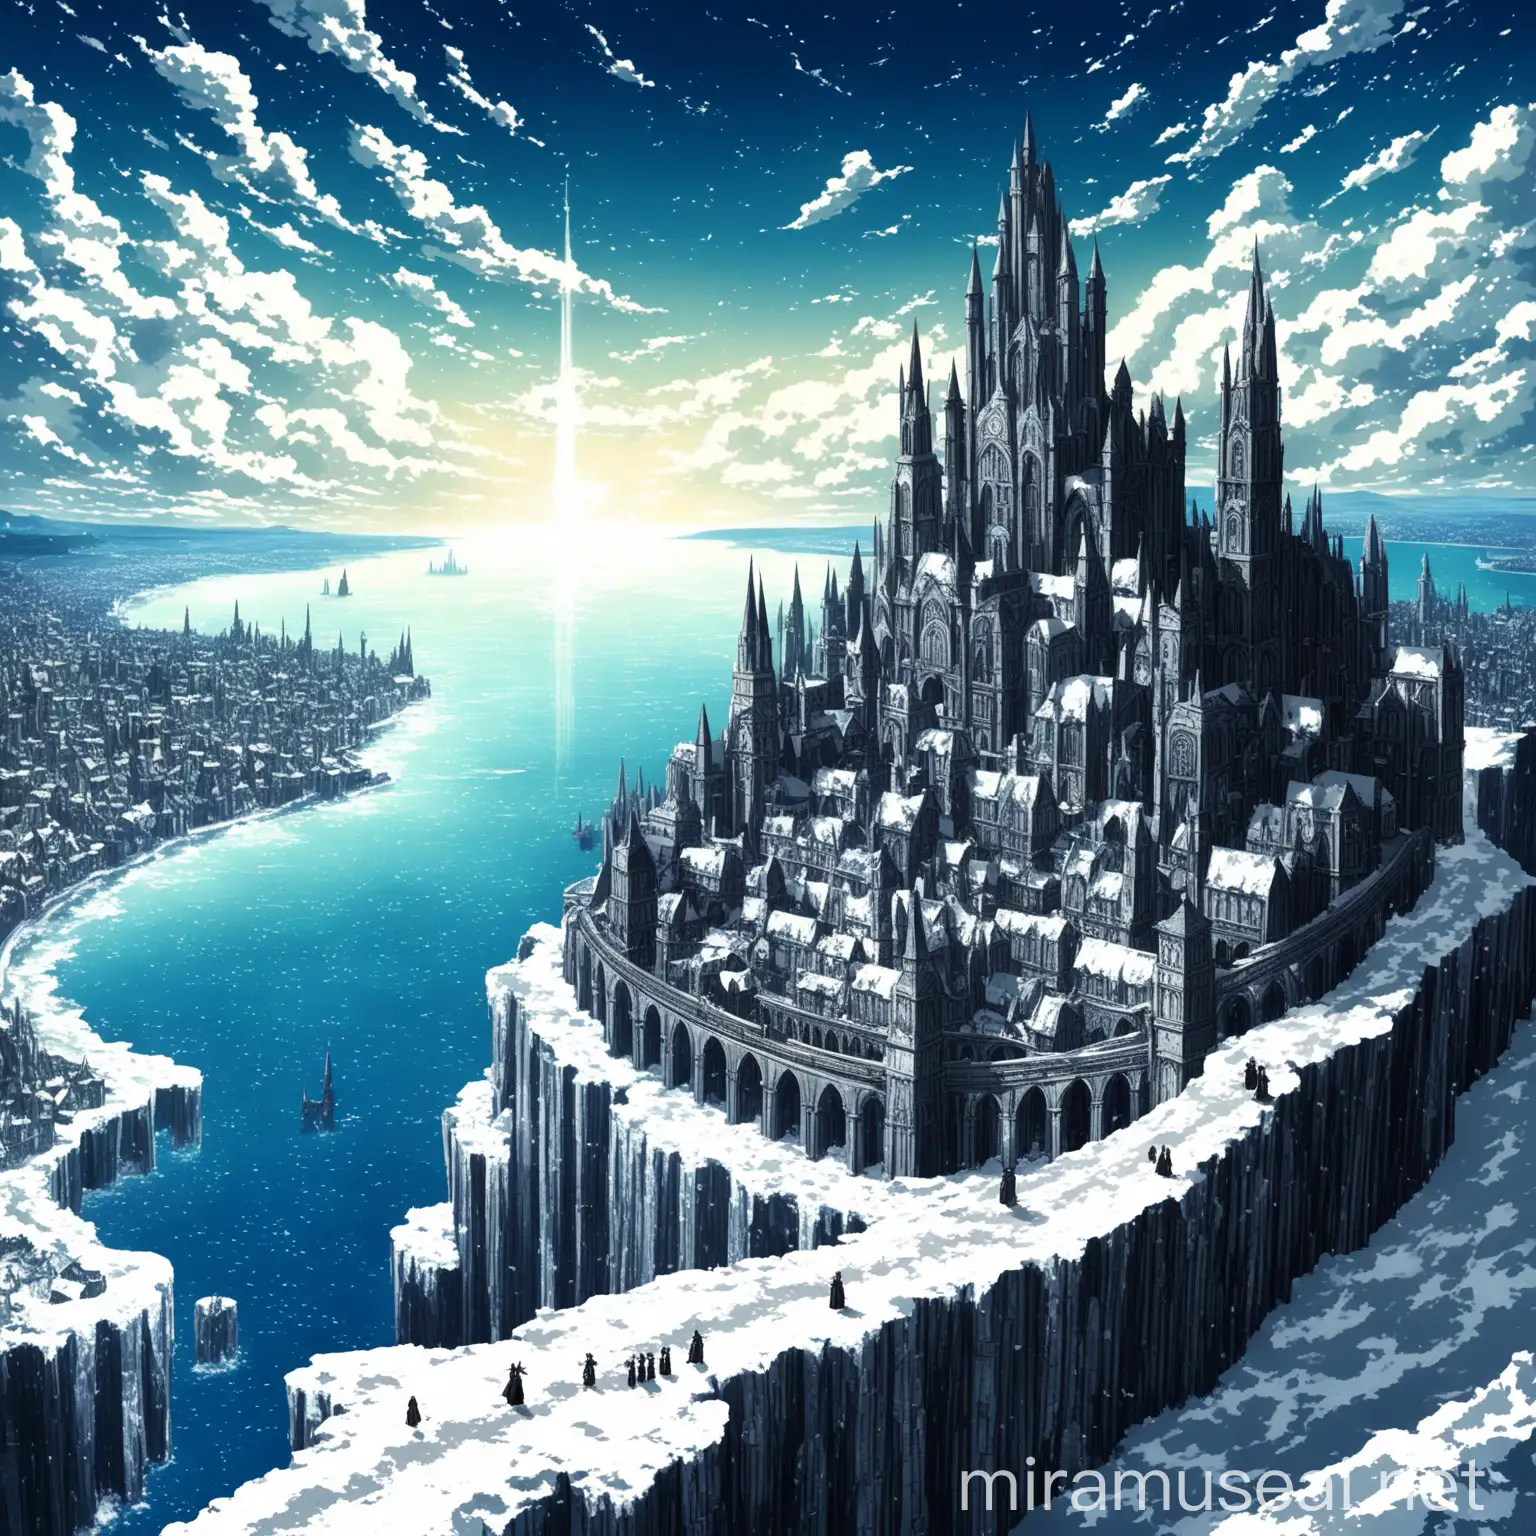 a fantasy gothic city on a promontory facing a infinite sea, there is a snow on the coast. There is a Magic academy on the highest point of the city, in anime

